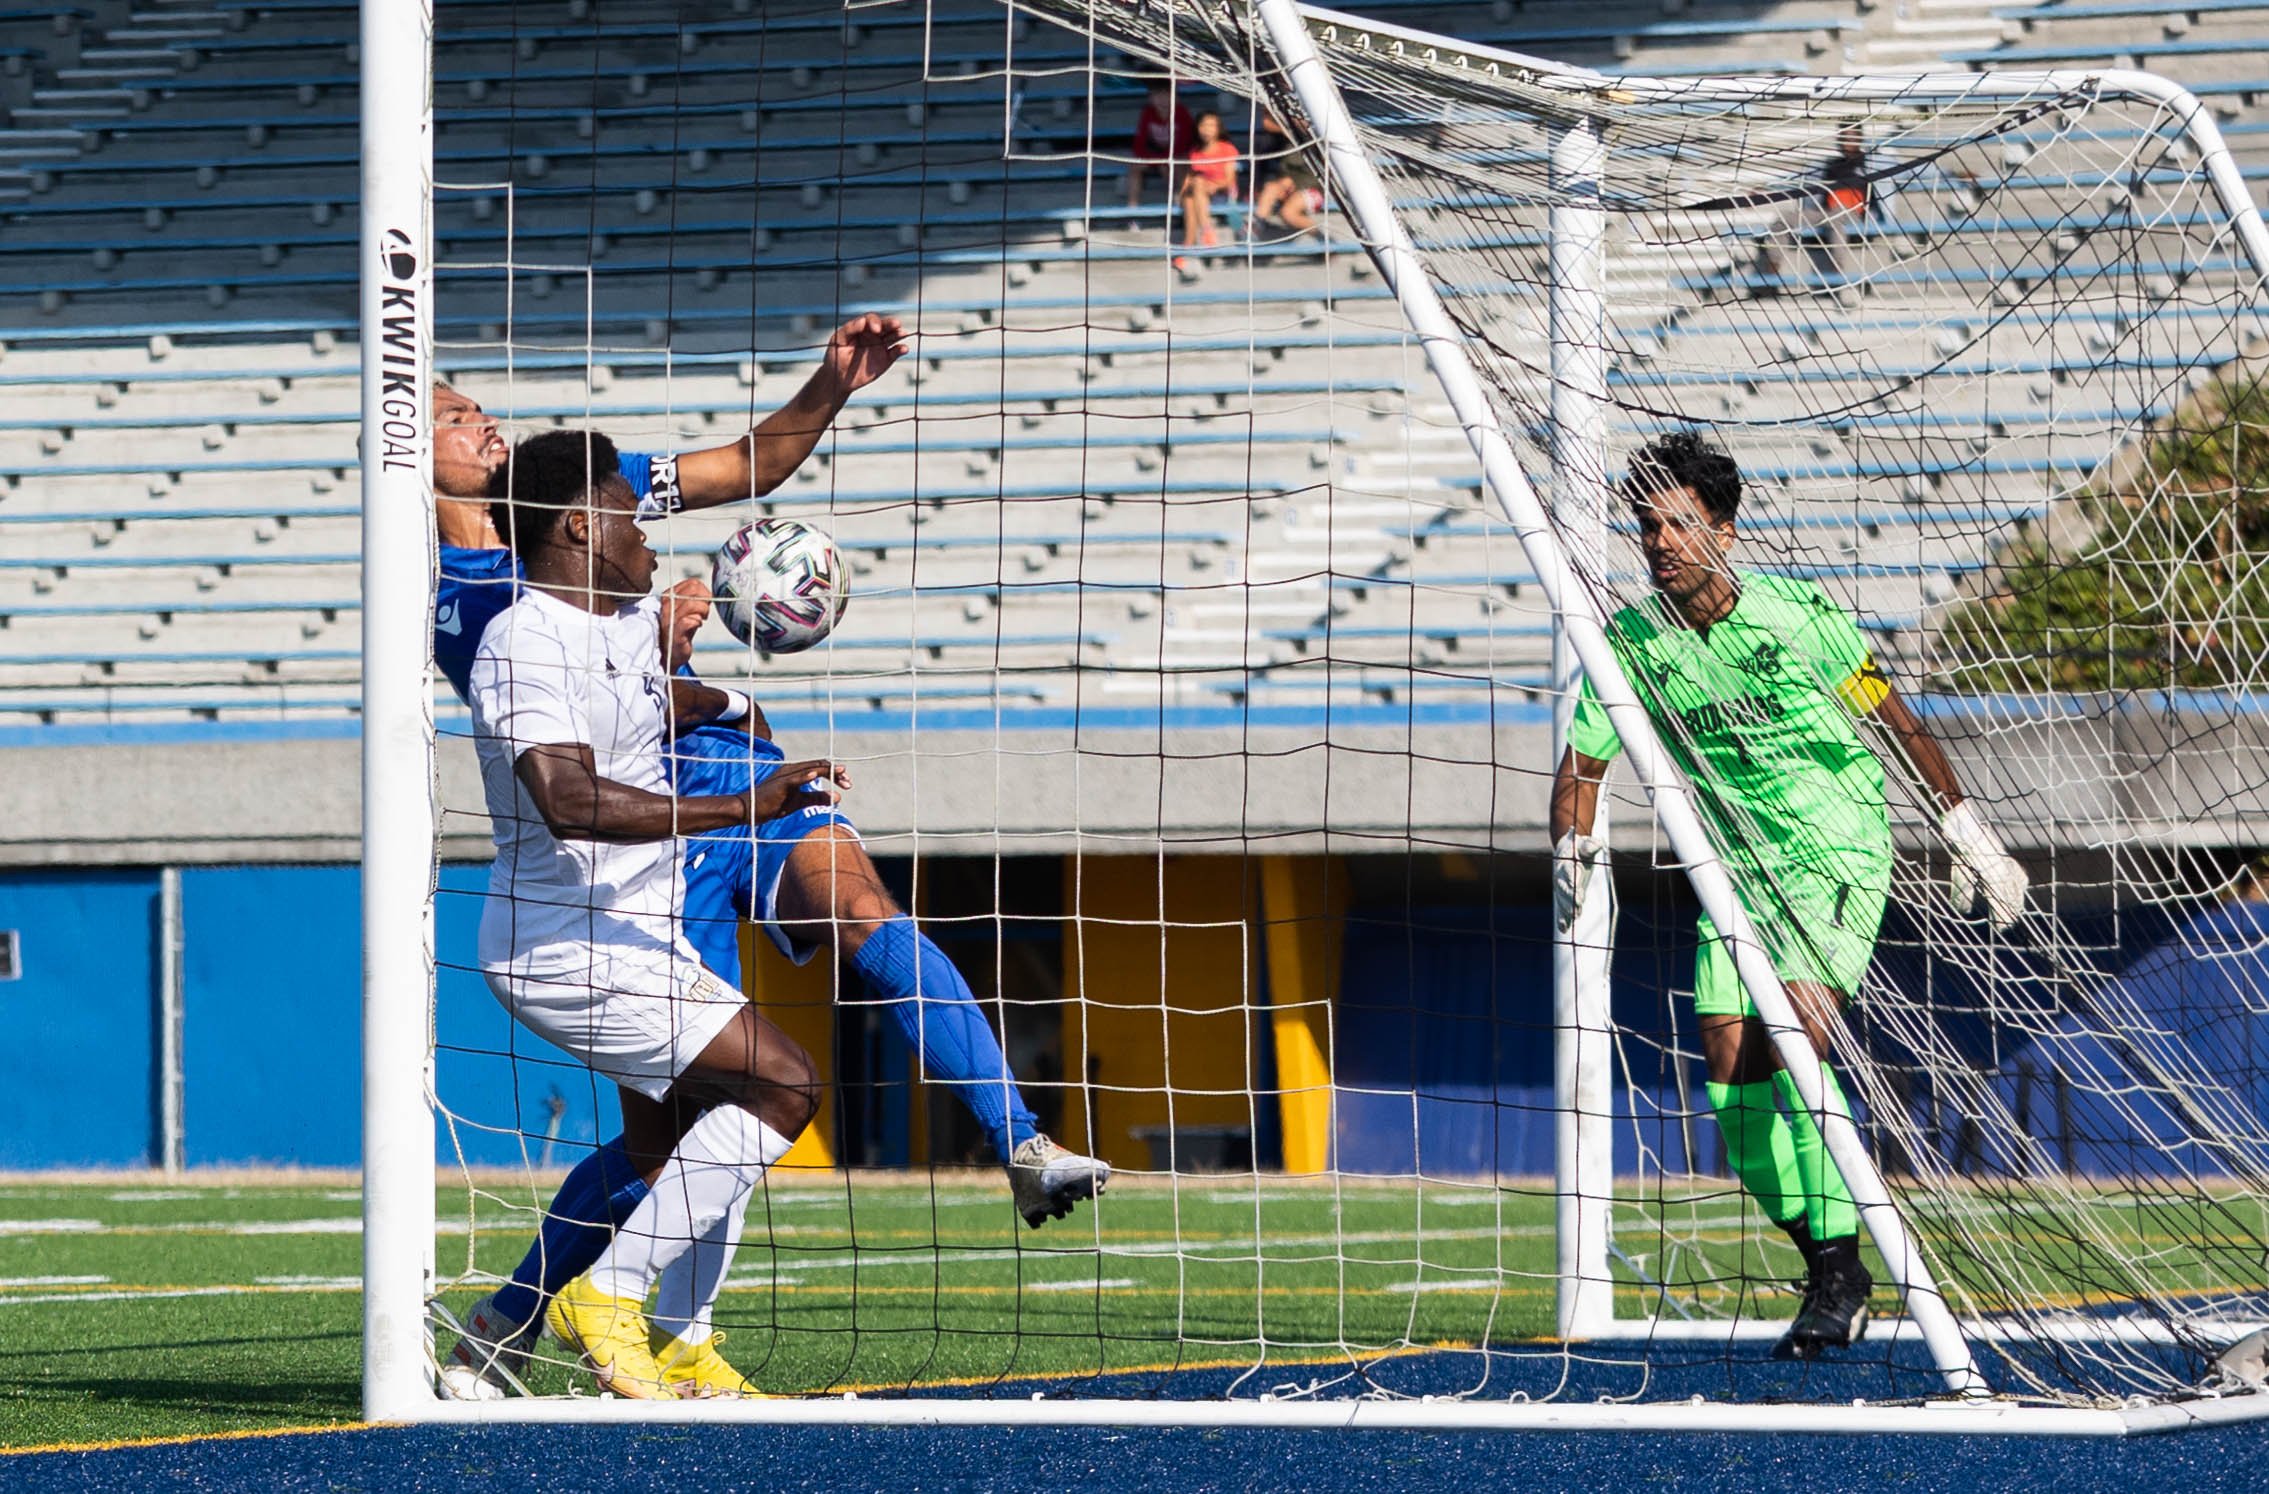 Fifth-year forward Victory Shumbusho chases the ball after keeper Nijjar's attempted save.